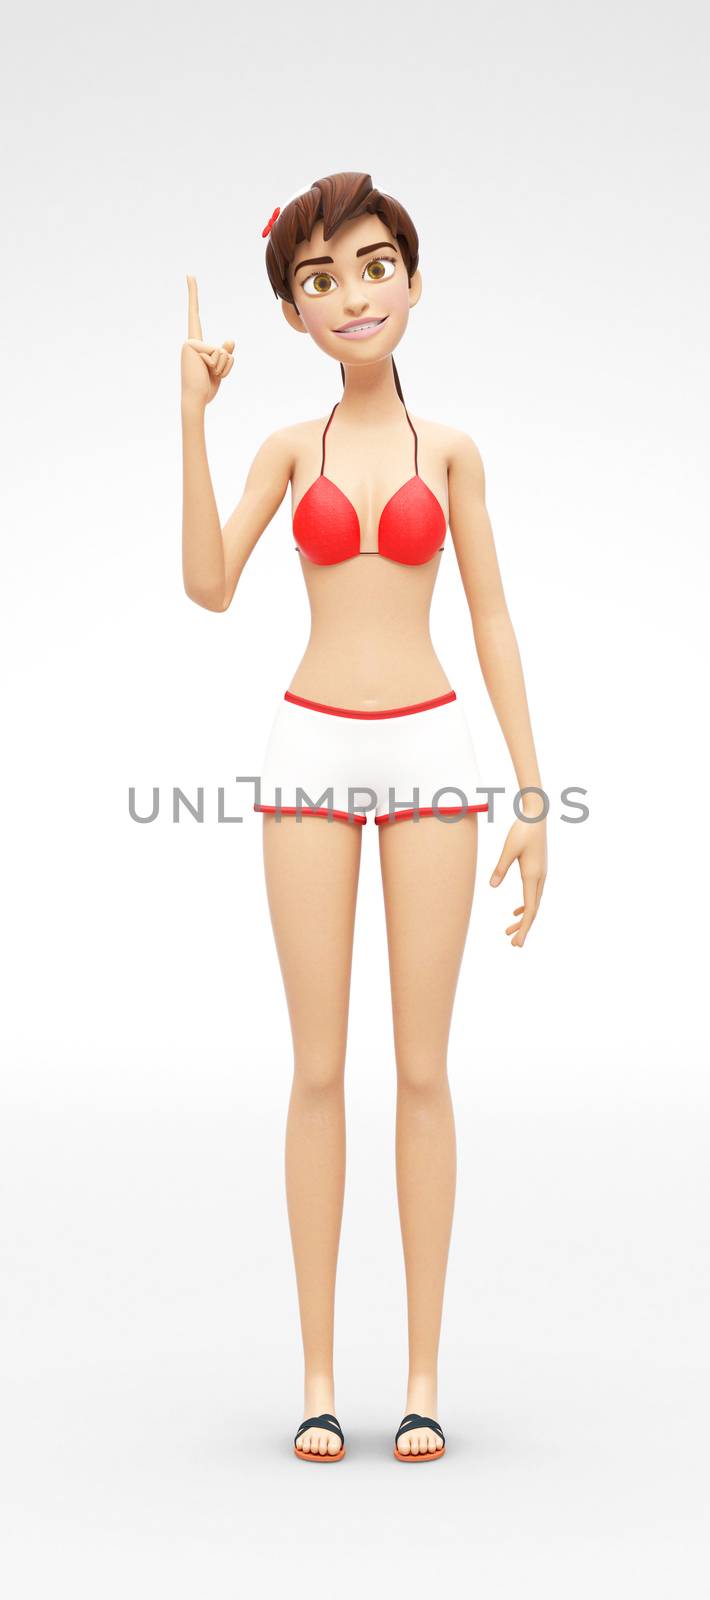 3D Rendered Animated Character in Casual Two-Piece Swimsuit Bikini, Isolated on White Spotlight Background
